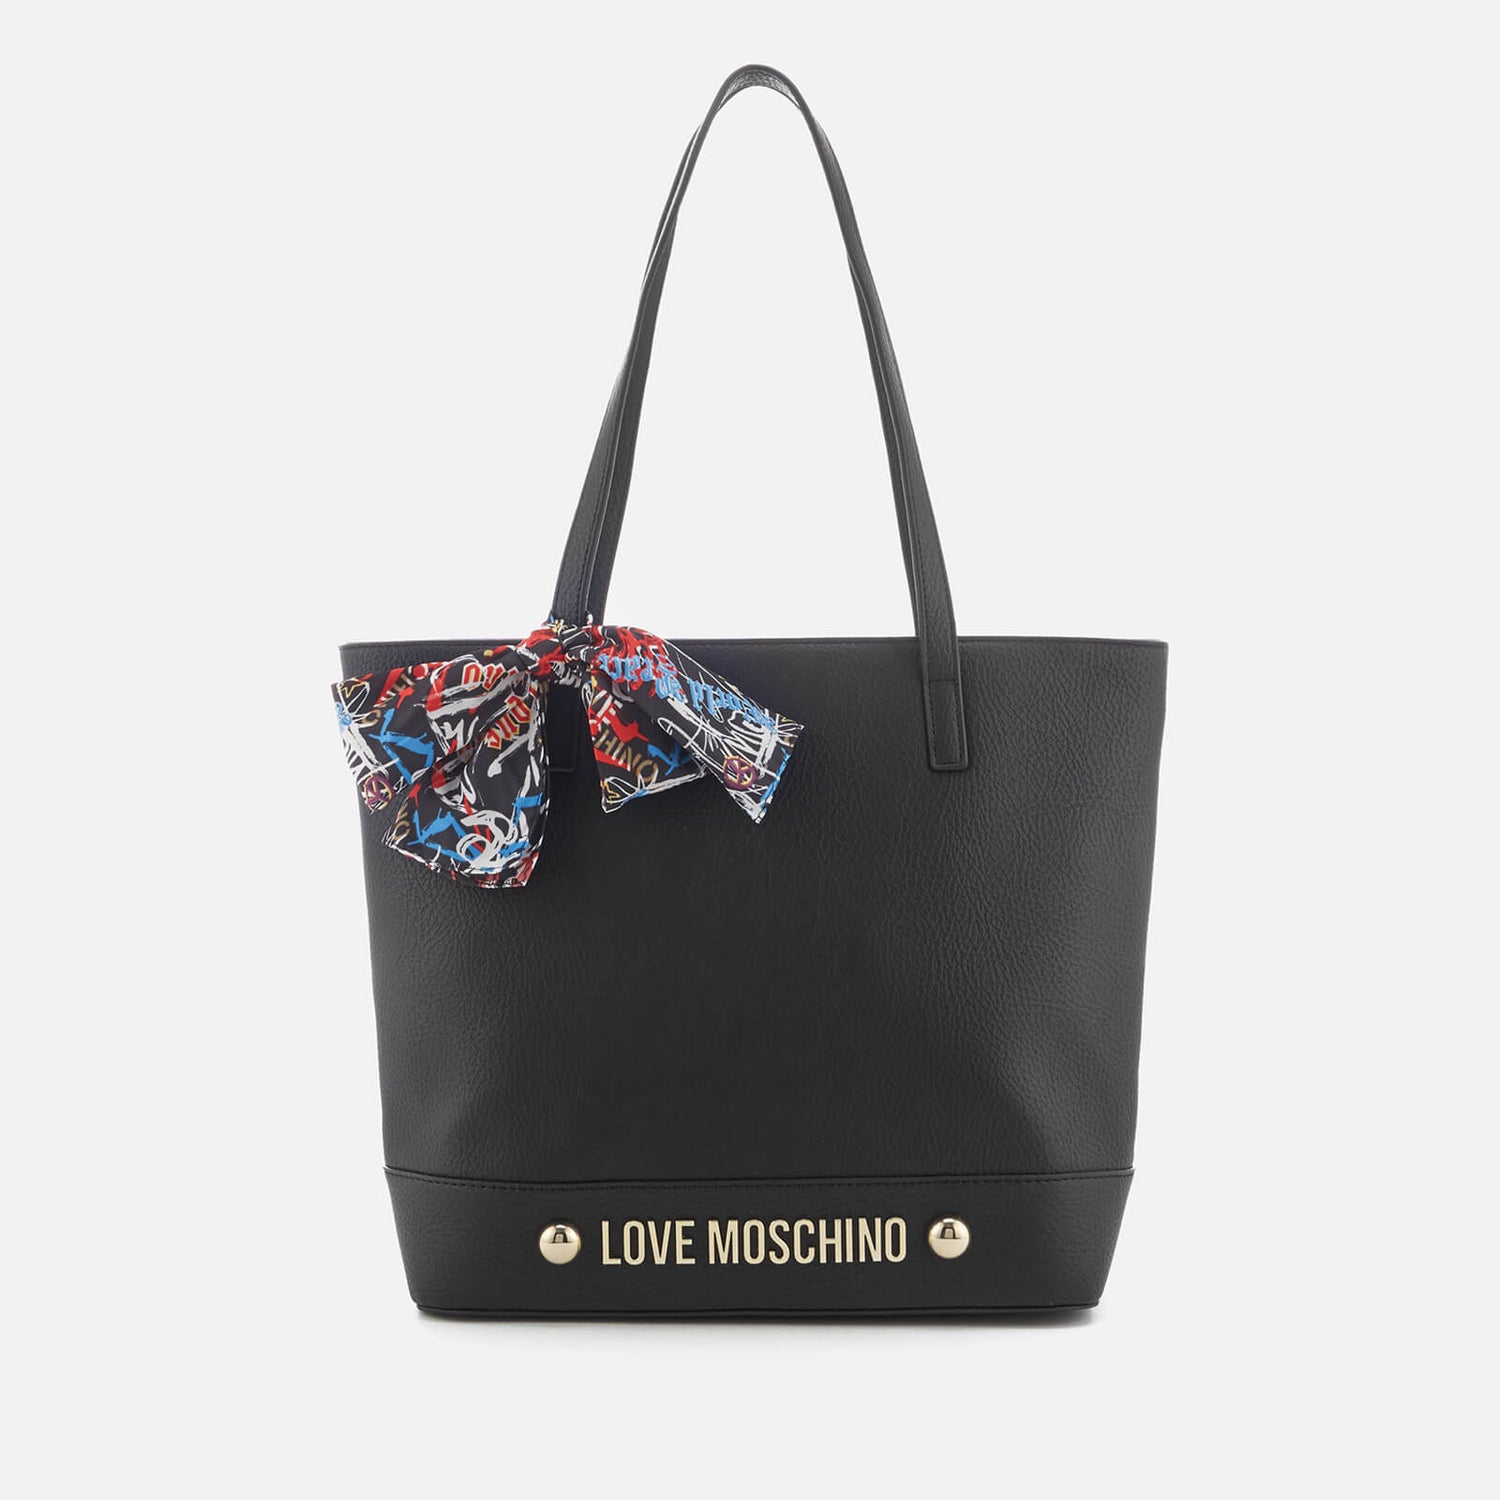 Love Moschino Women's Tote Bag with Scarf Bow - Black | TheHut.com